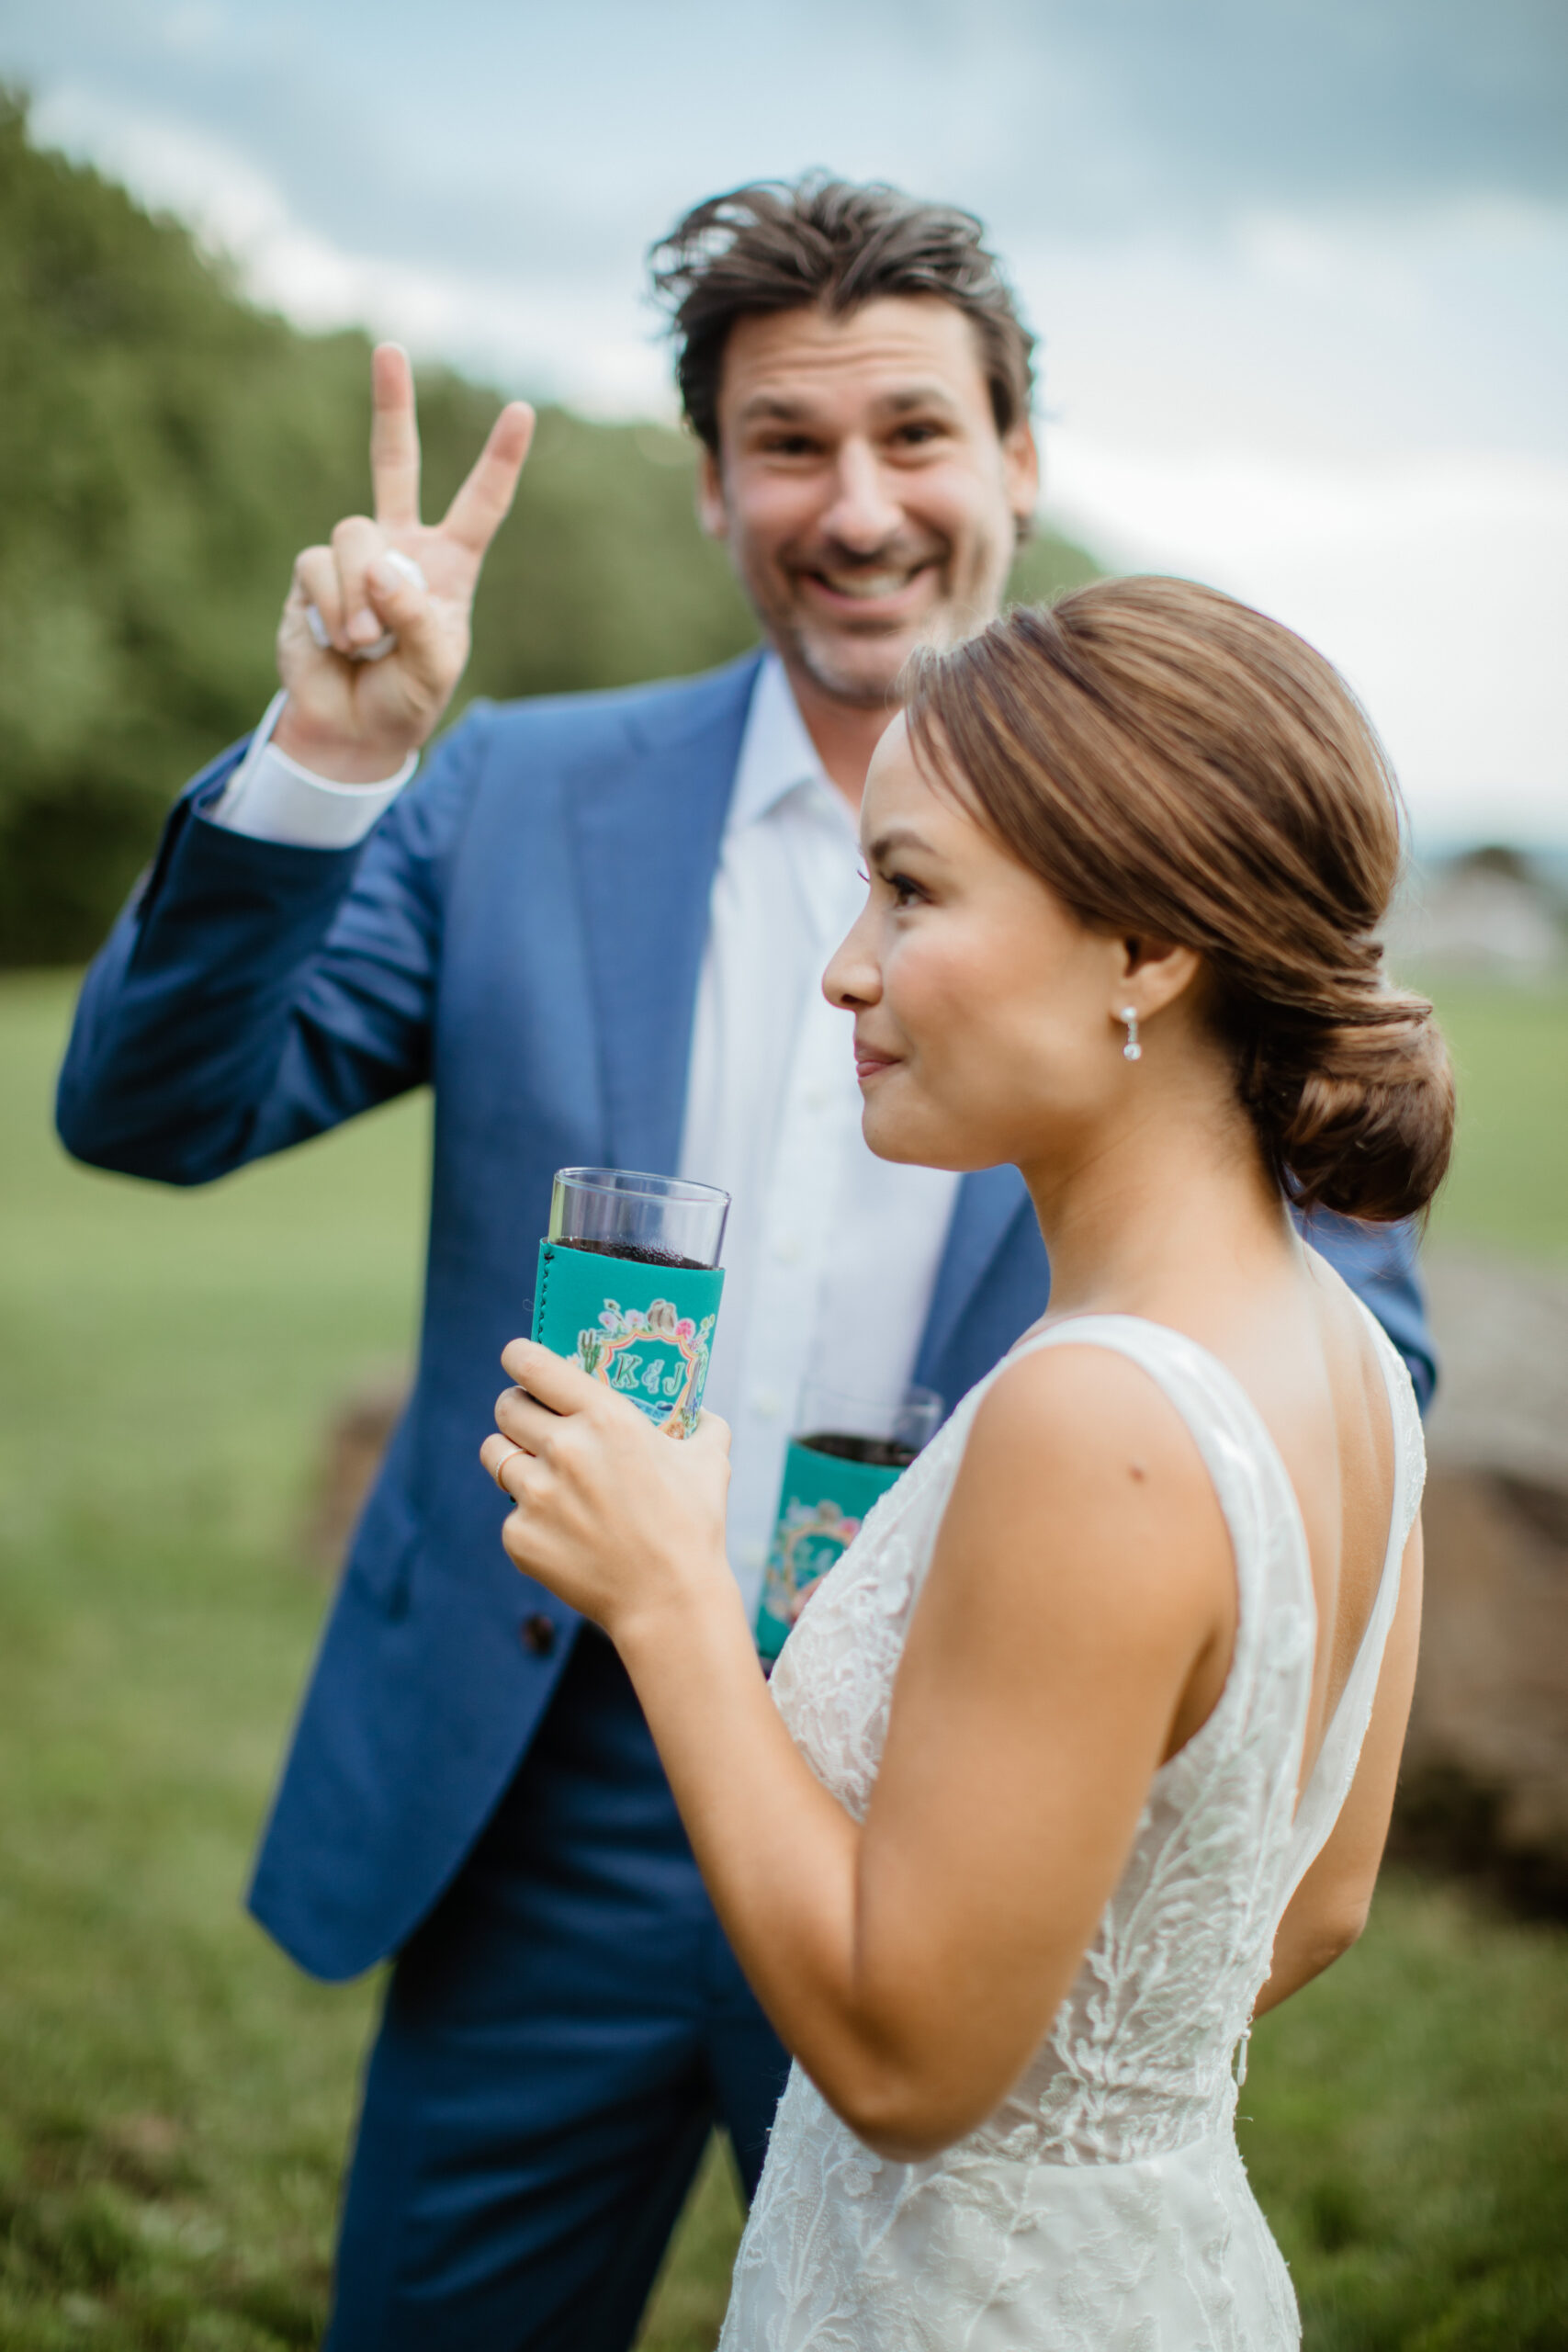 Candid photo of a stunning bride and groom during their dreamy modern wedding